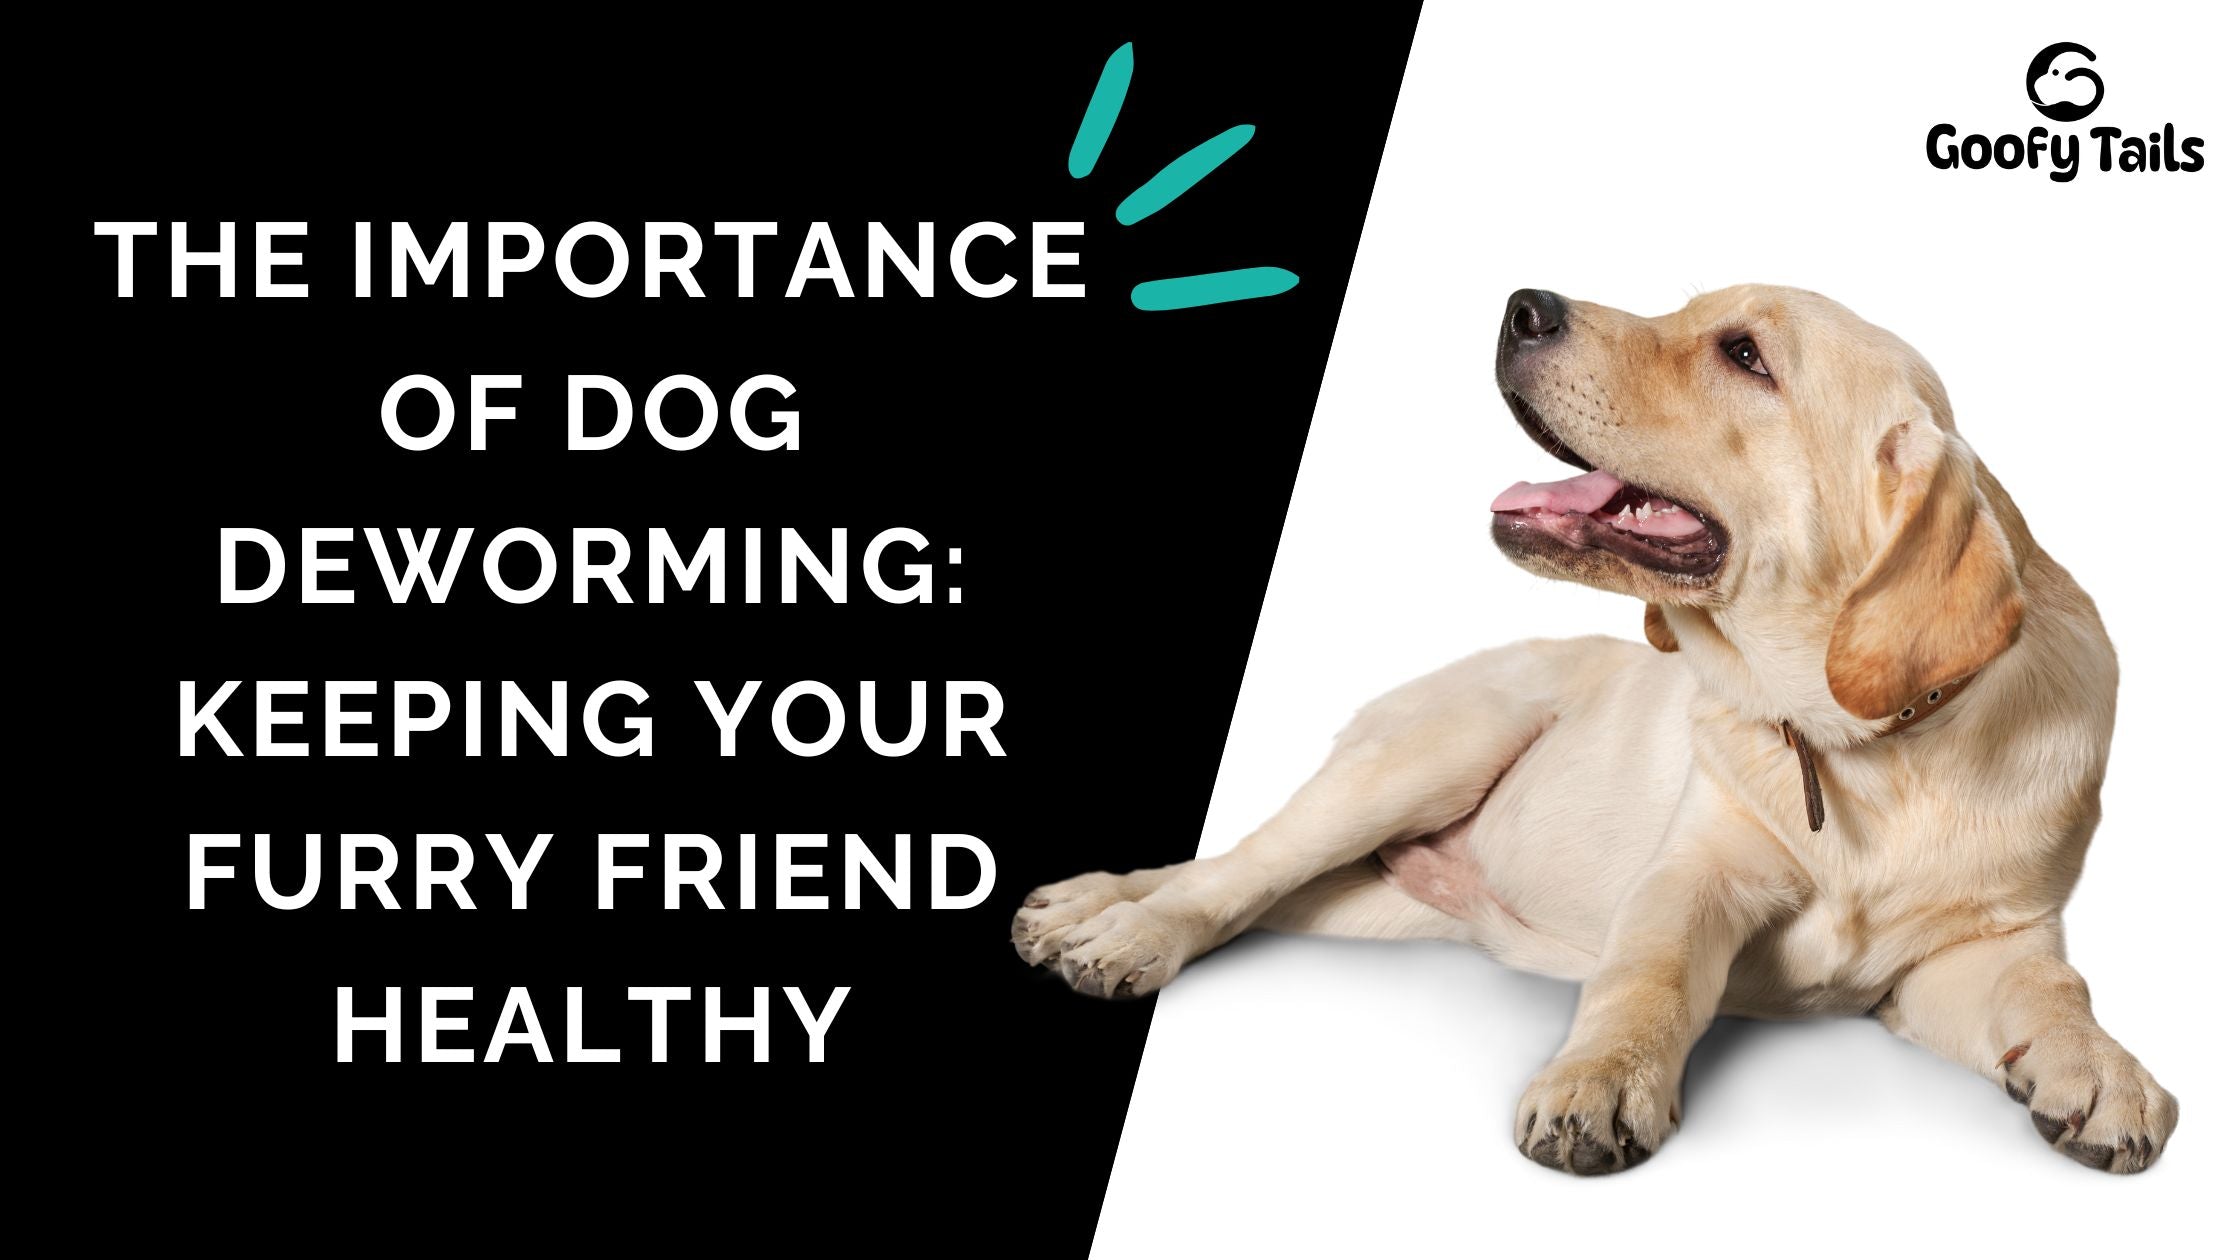 The Importance of Dog Deworming: Keeping Your Furry Friend Healthy